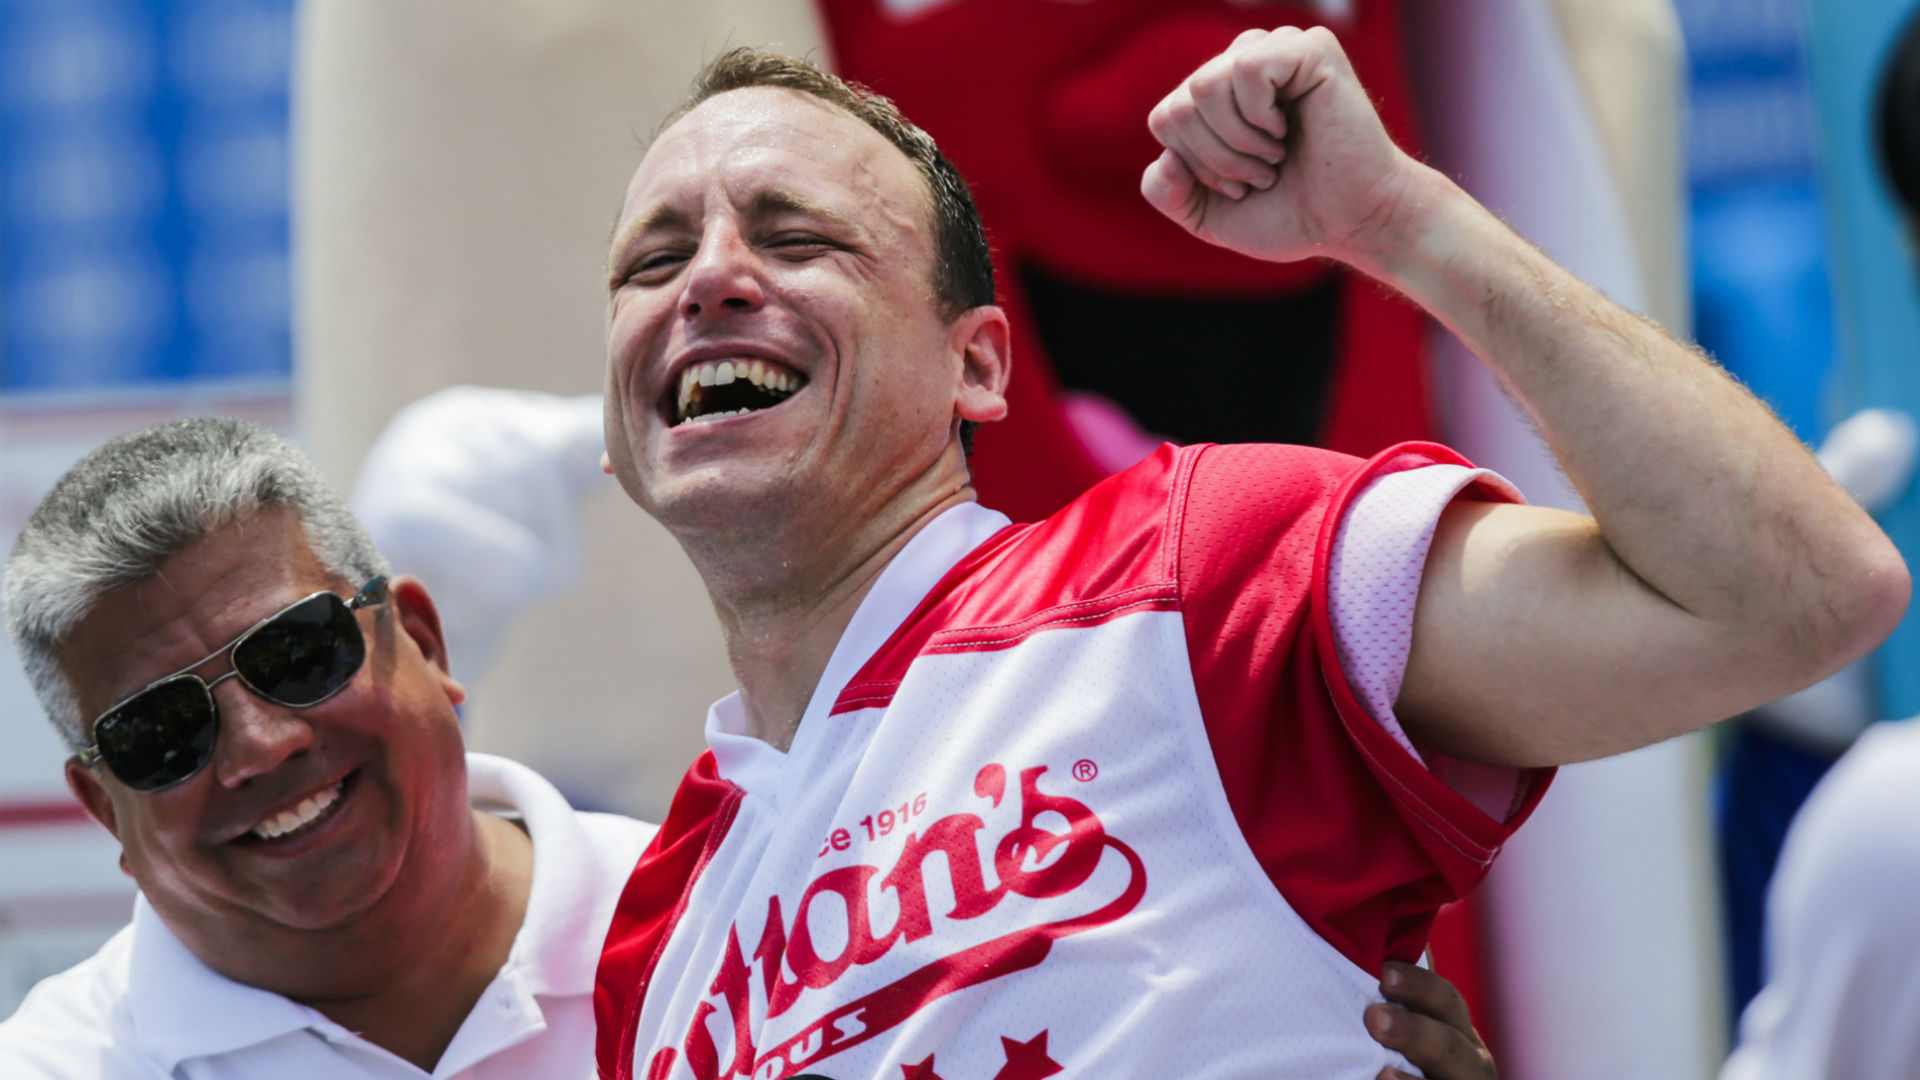 Photo of Nathan Hot Dog Contest Bonus: How much money will the winner earn in 2021?